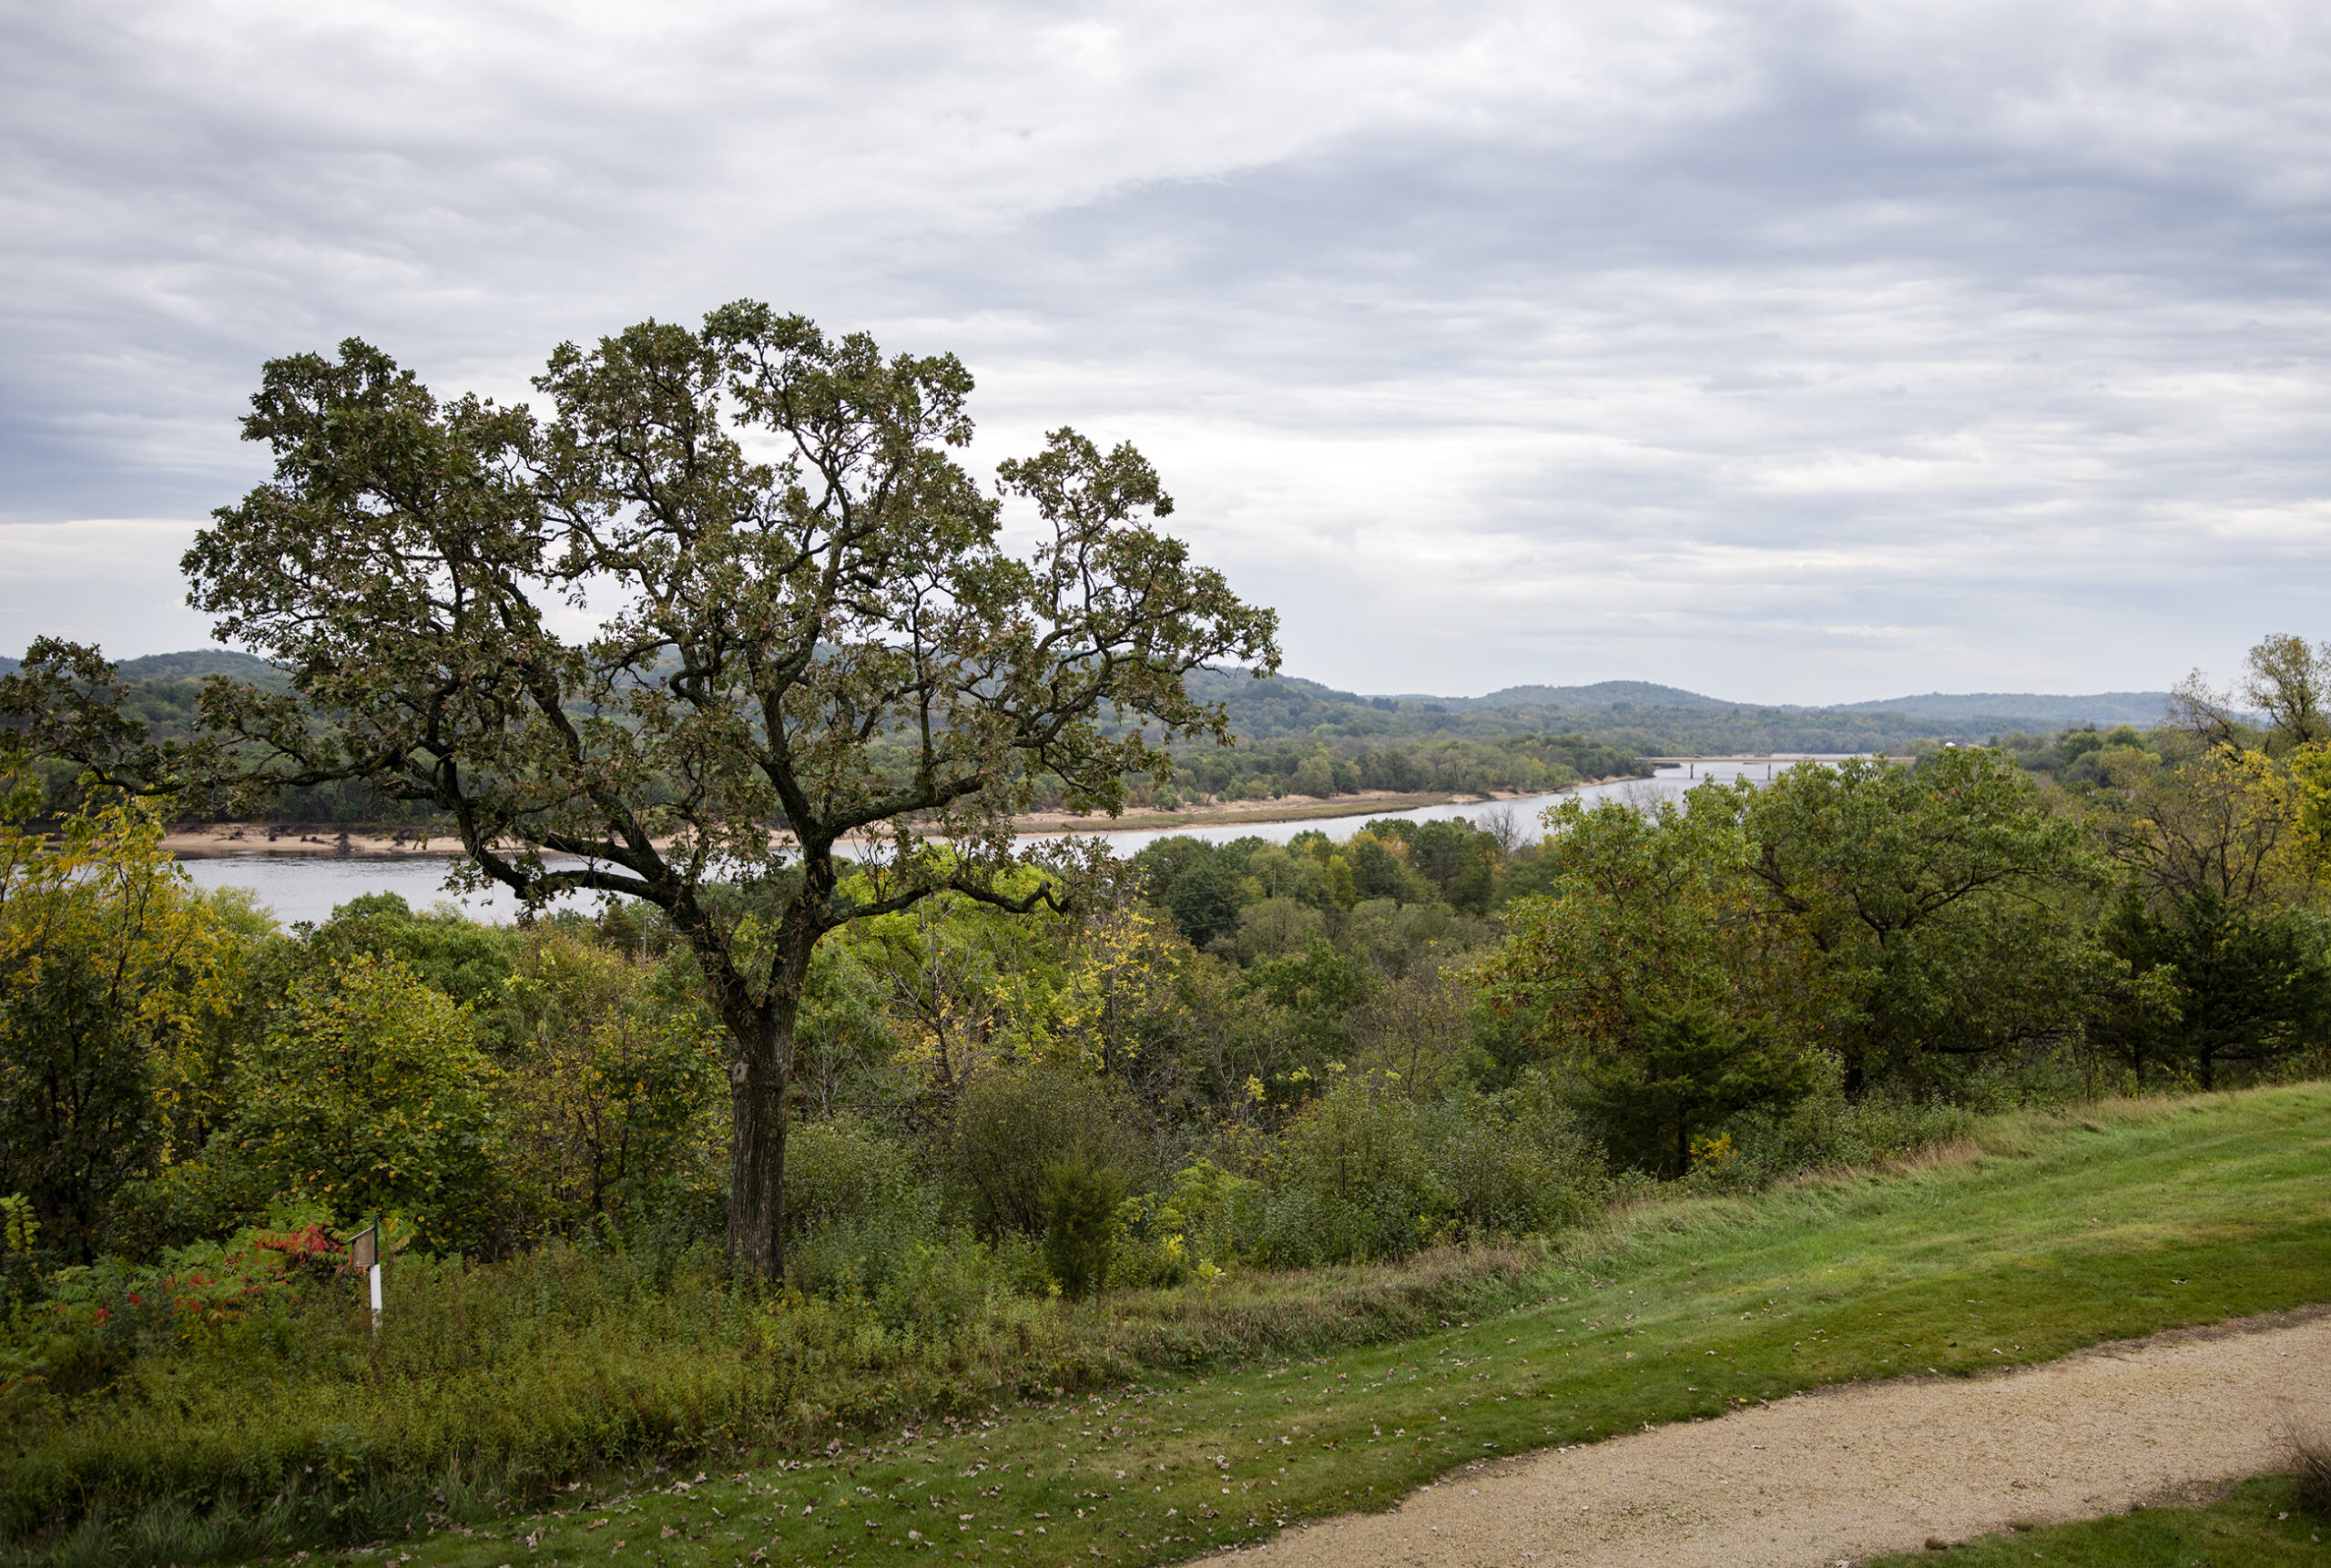 Trees and hills surround the Wisconsin River.